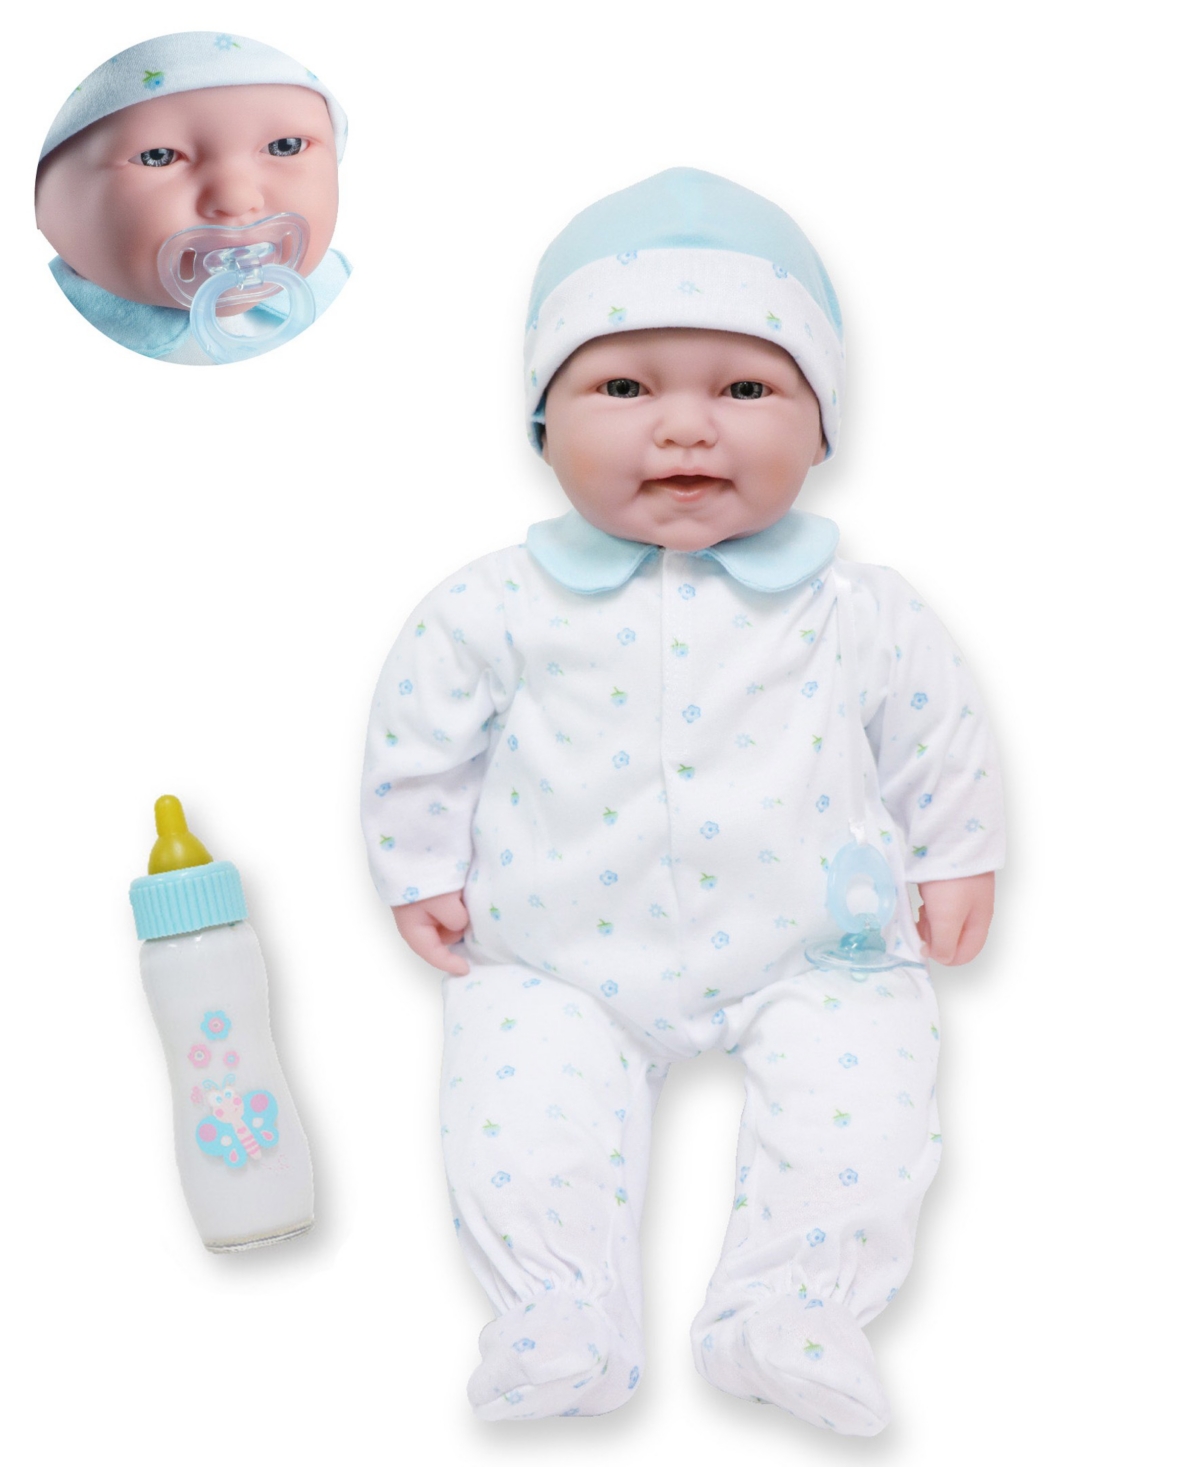 Jc Toys La Baby Caucasian 20" Soft Body Baby Doll Blue Outfit